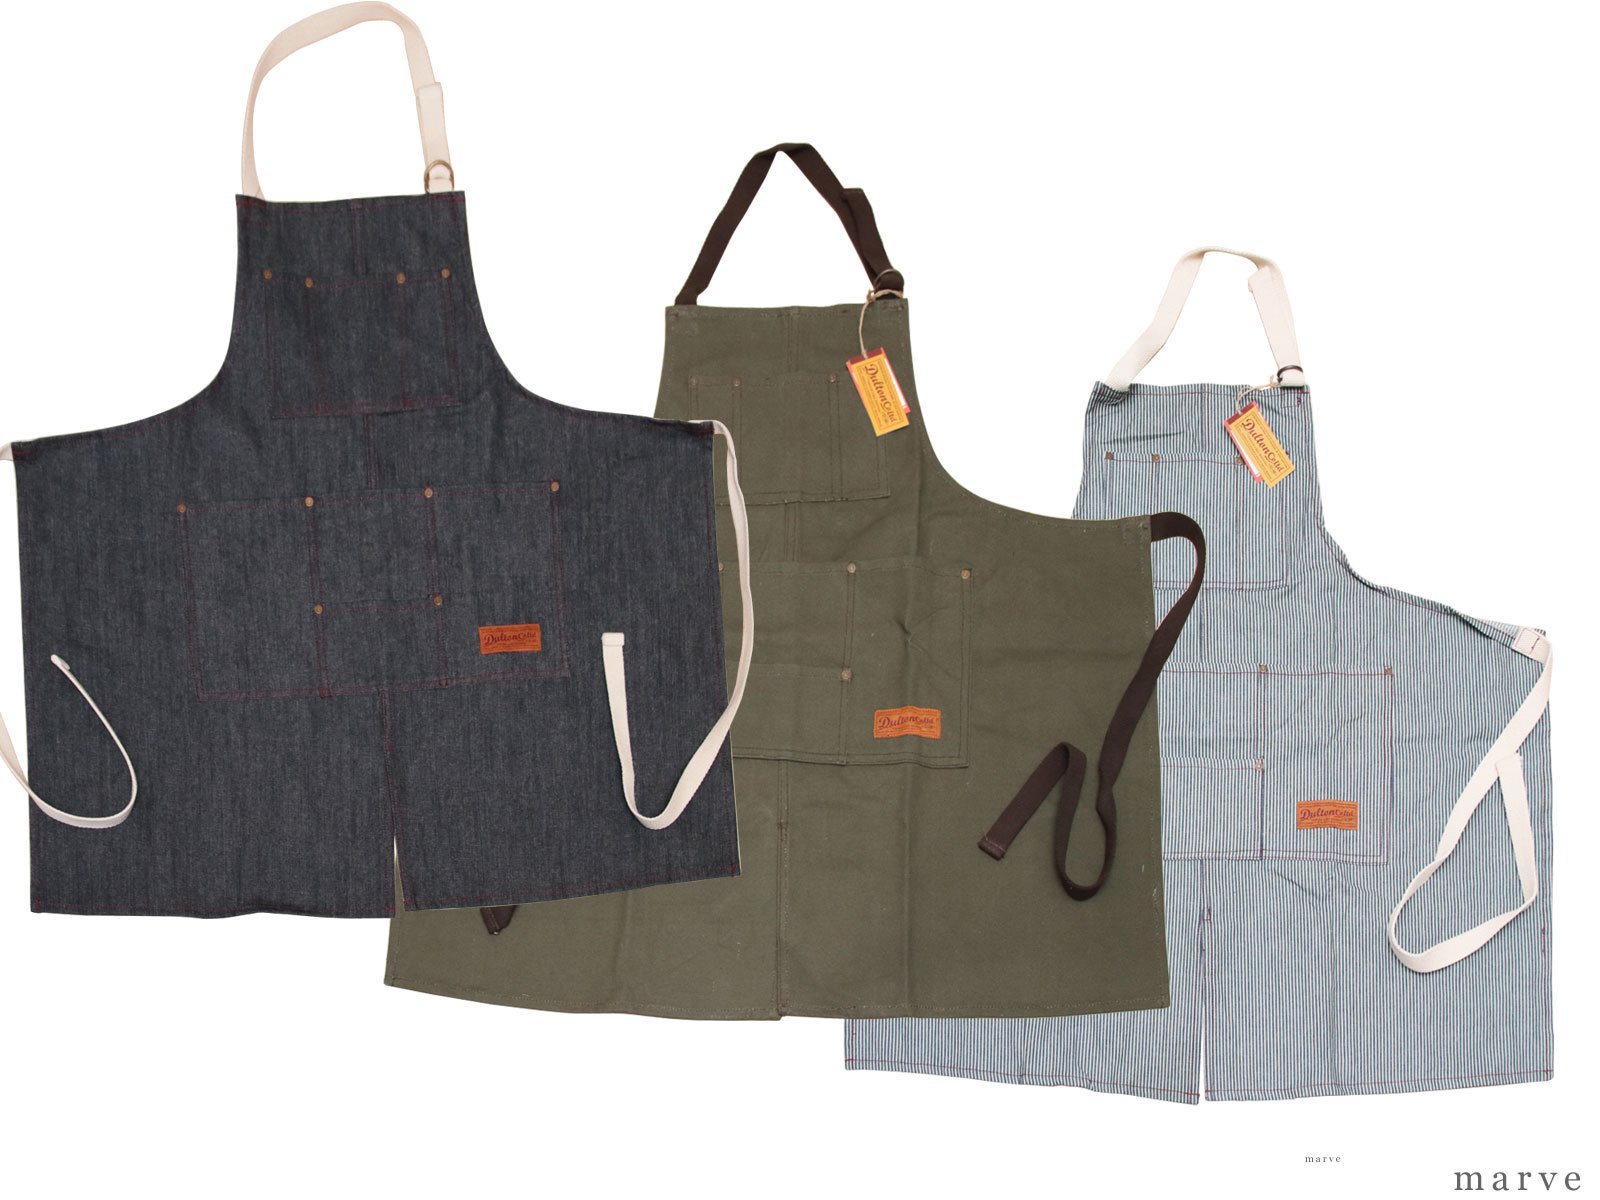 MW ワーク　エプロン（WORK APRON ）<img class='new_mark_img2' src='https://img.shop-pro.jp/img/new/icons16.gif' style='border:none;display:inline;margin:0px;padding:0px;width:auto;' />